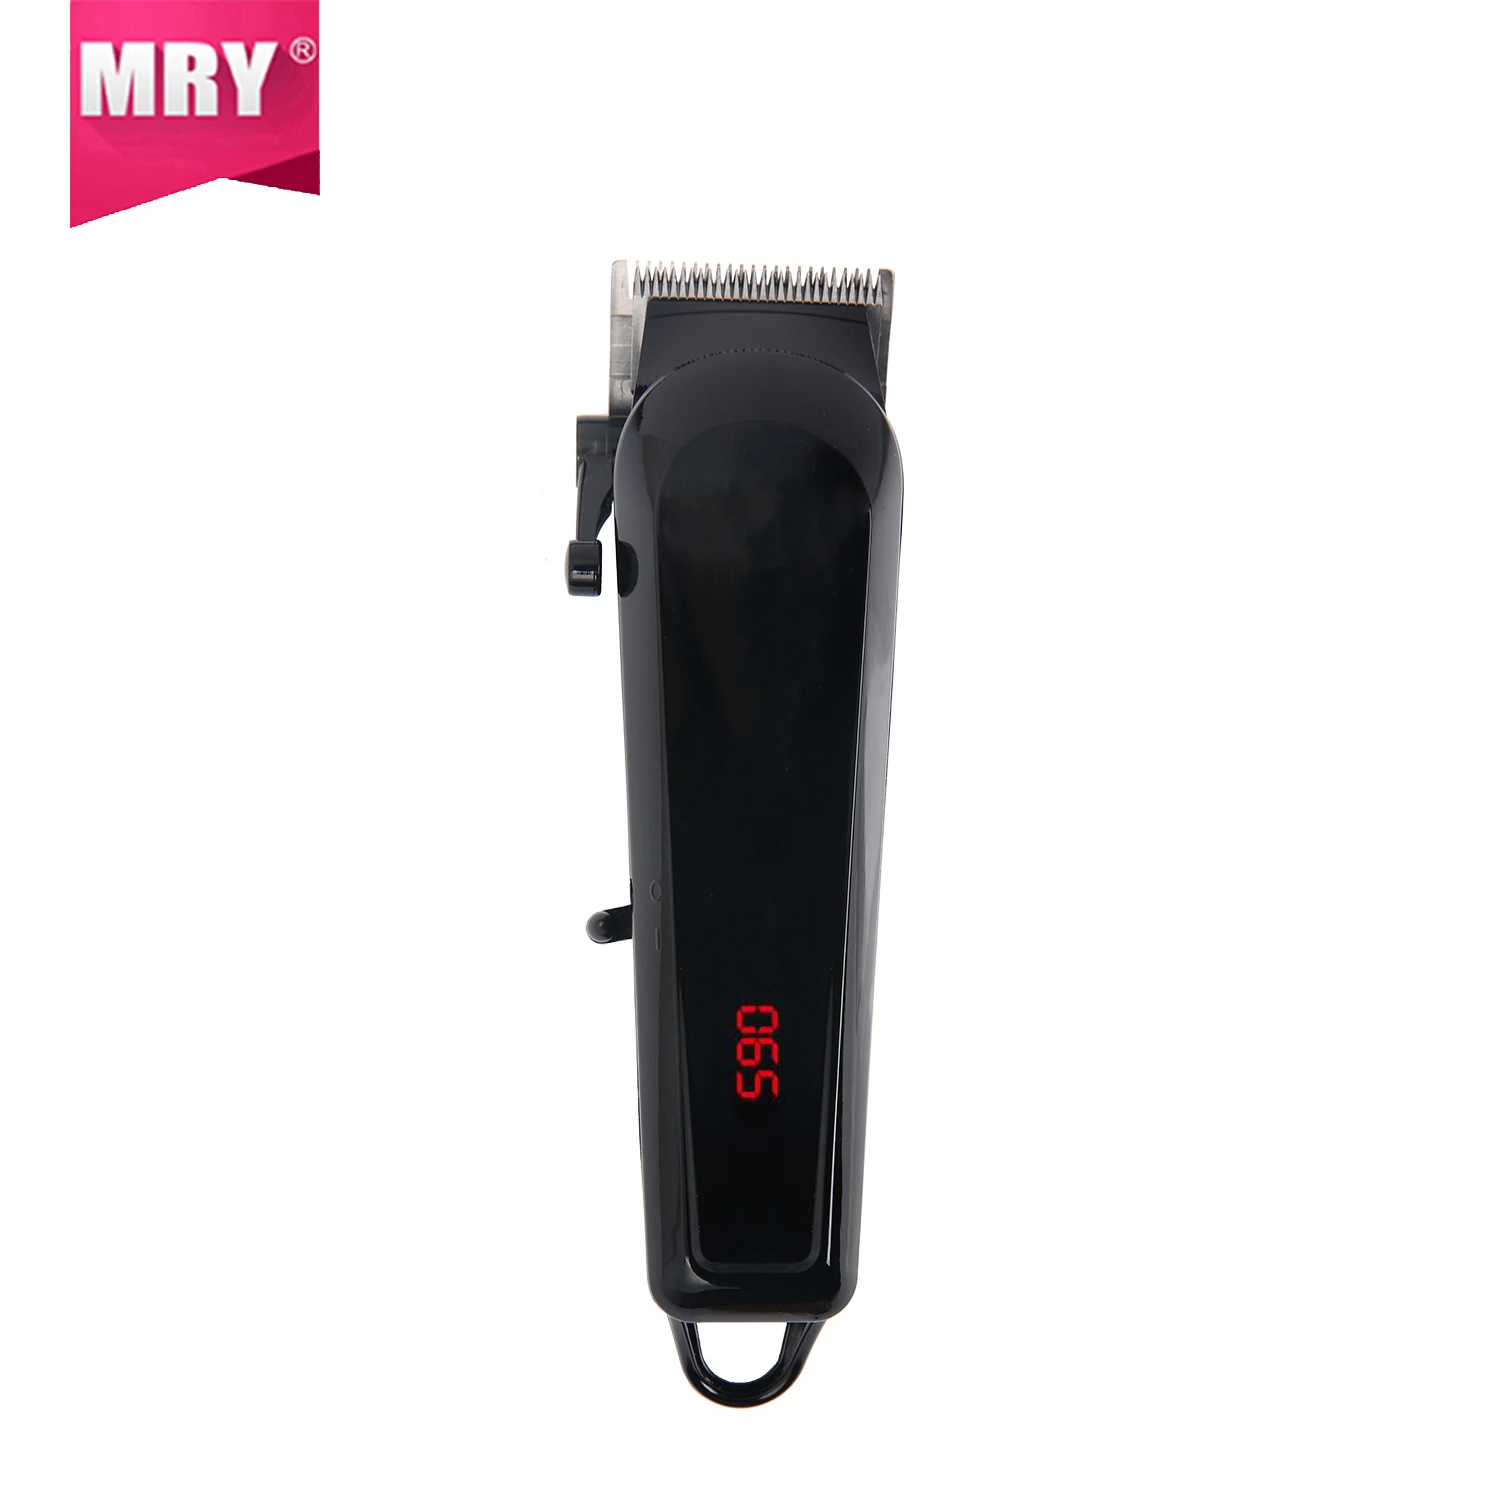 best professional hair trimmer 2020